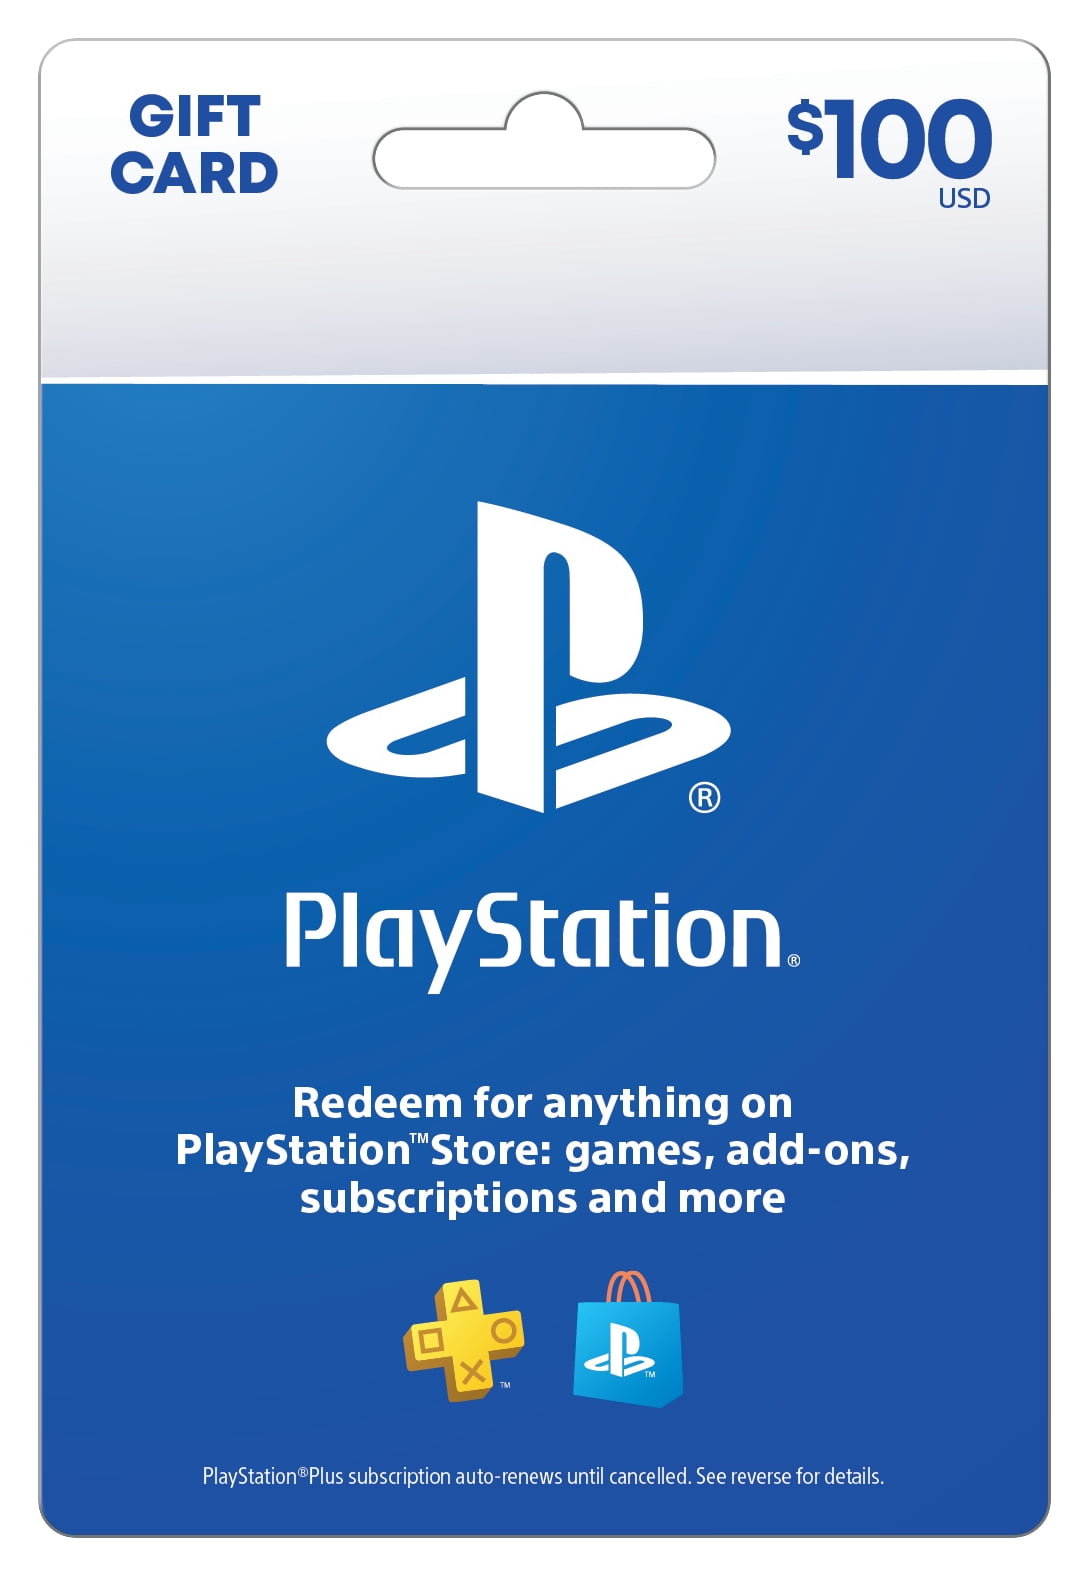 Mobile Billing Adds New Payment Option To PlayStation Store